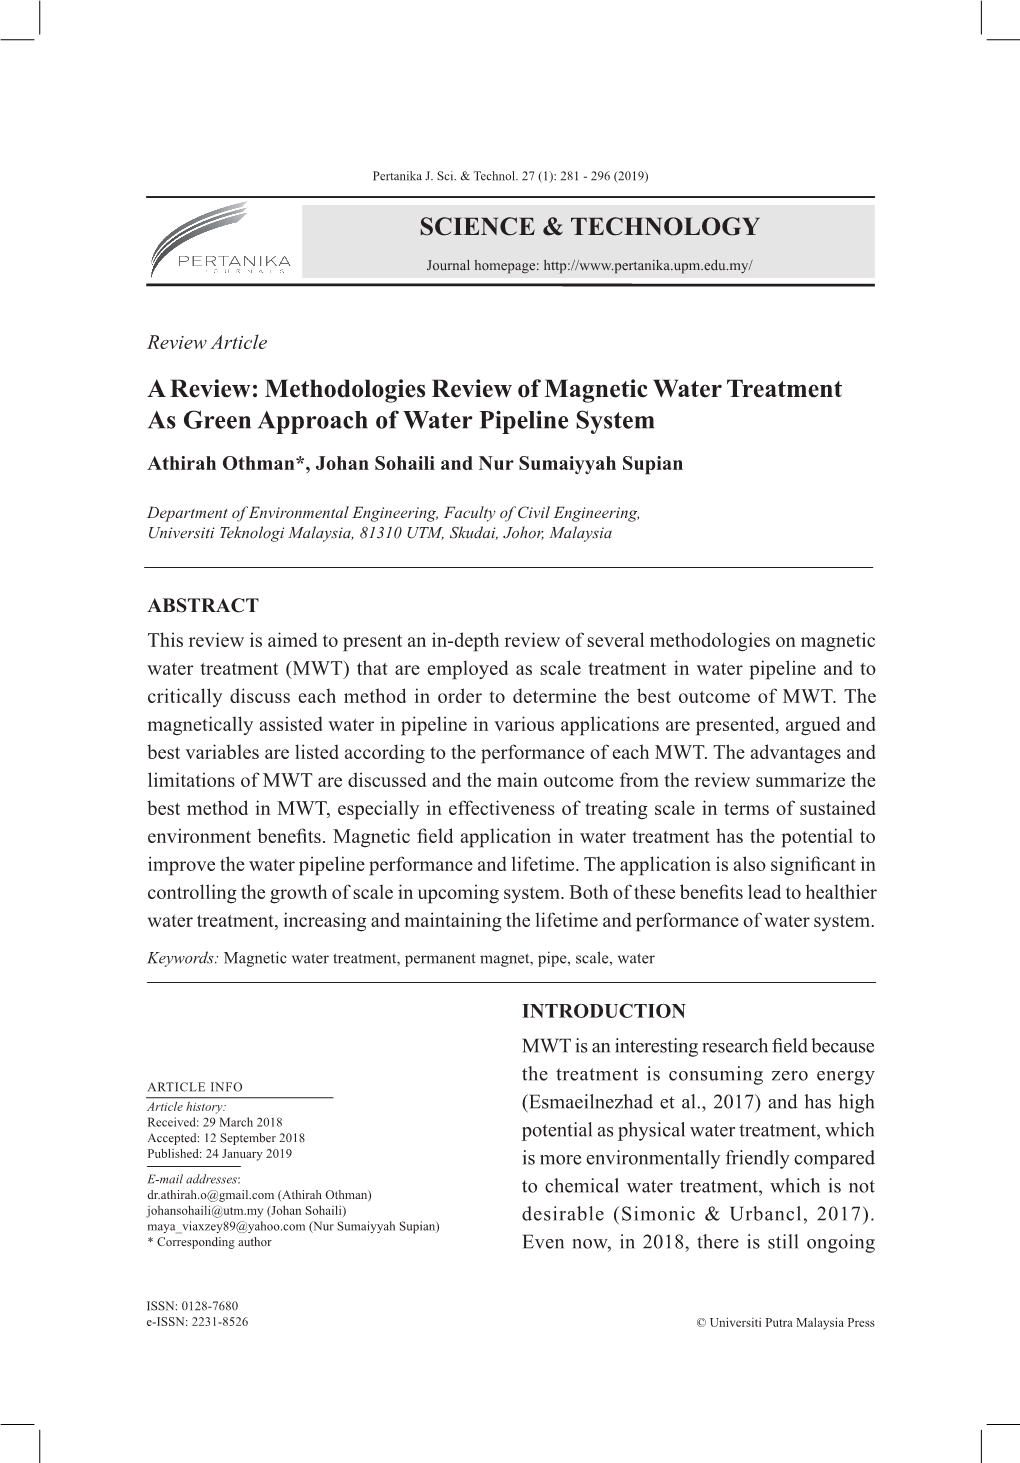 Methodologies Review of Magnetic Water Treatment As Green Approach of Water Pipeline System Athirah Othman*, Johan Sohaili and Nur Sumaiyyah Supian